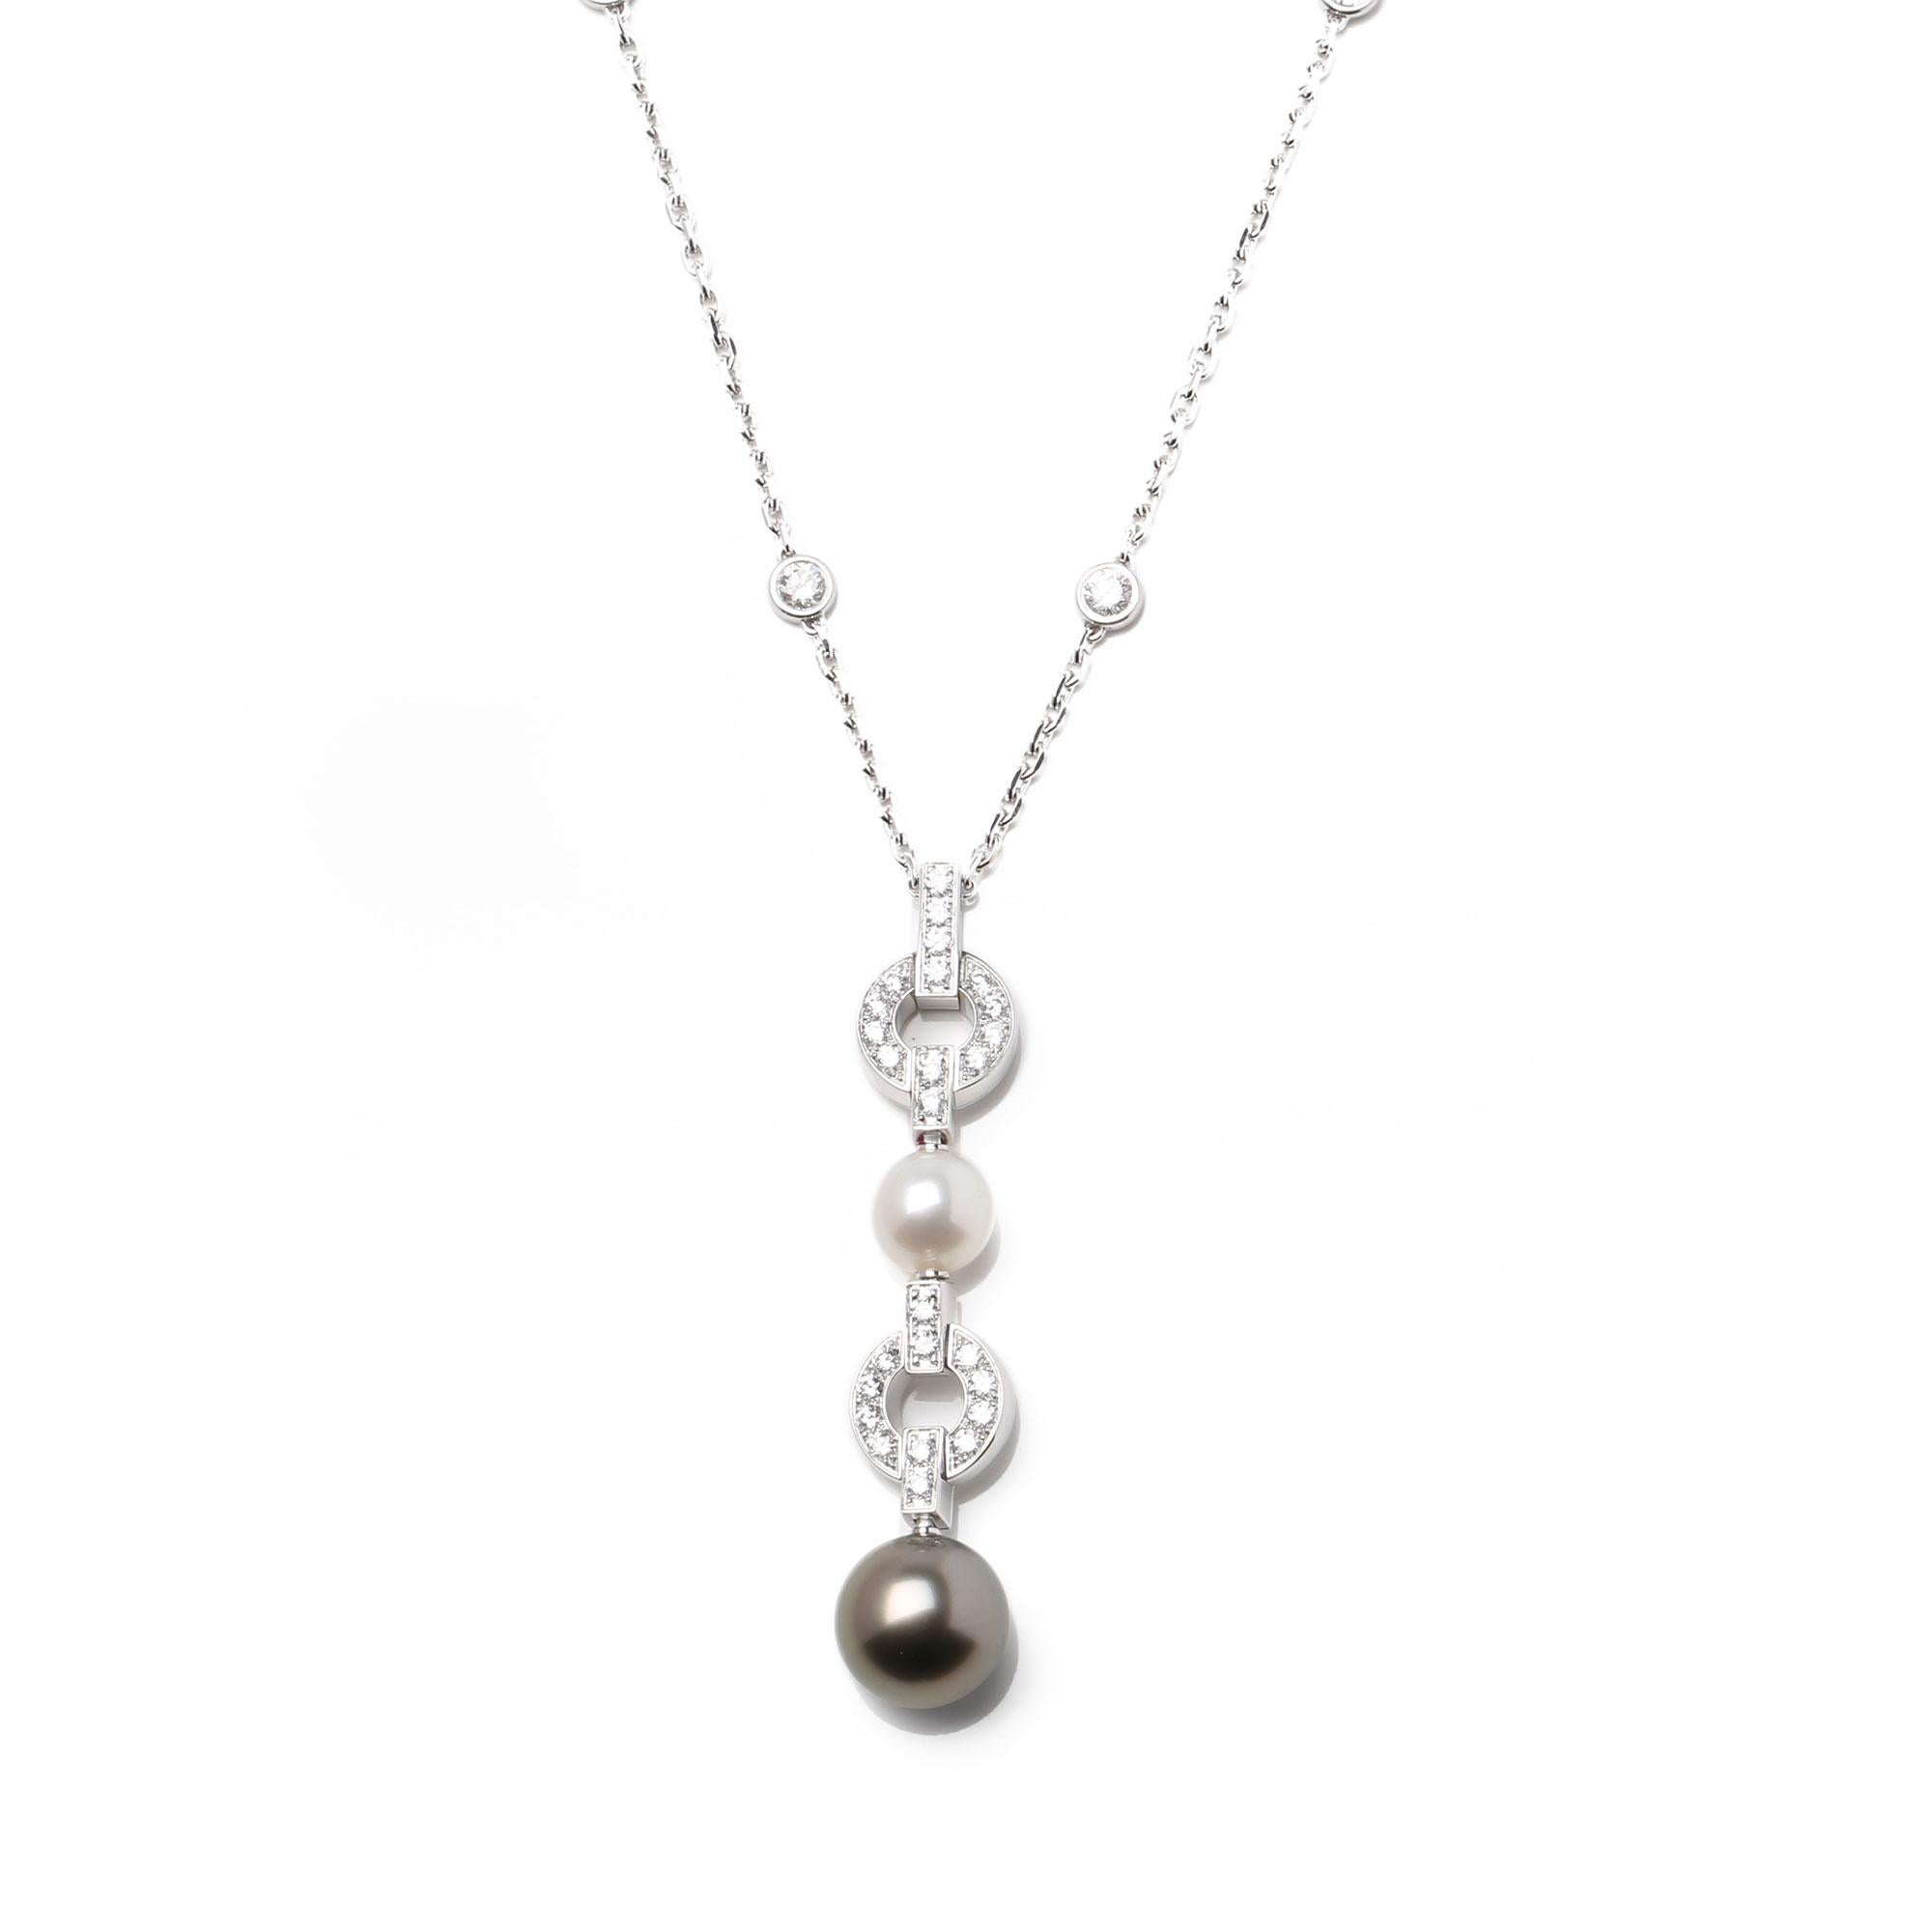 This necklace by Cartier is from their Himalia collection and features a Diamond and Cultured Pearl pendant, on an 18ct white gold chain with further bezel set diamonds. Accompanied with a Cartier pouch. Our Xupes reference is COMJ527 should you